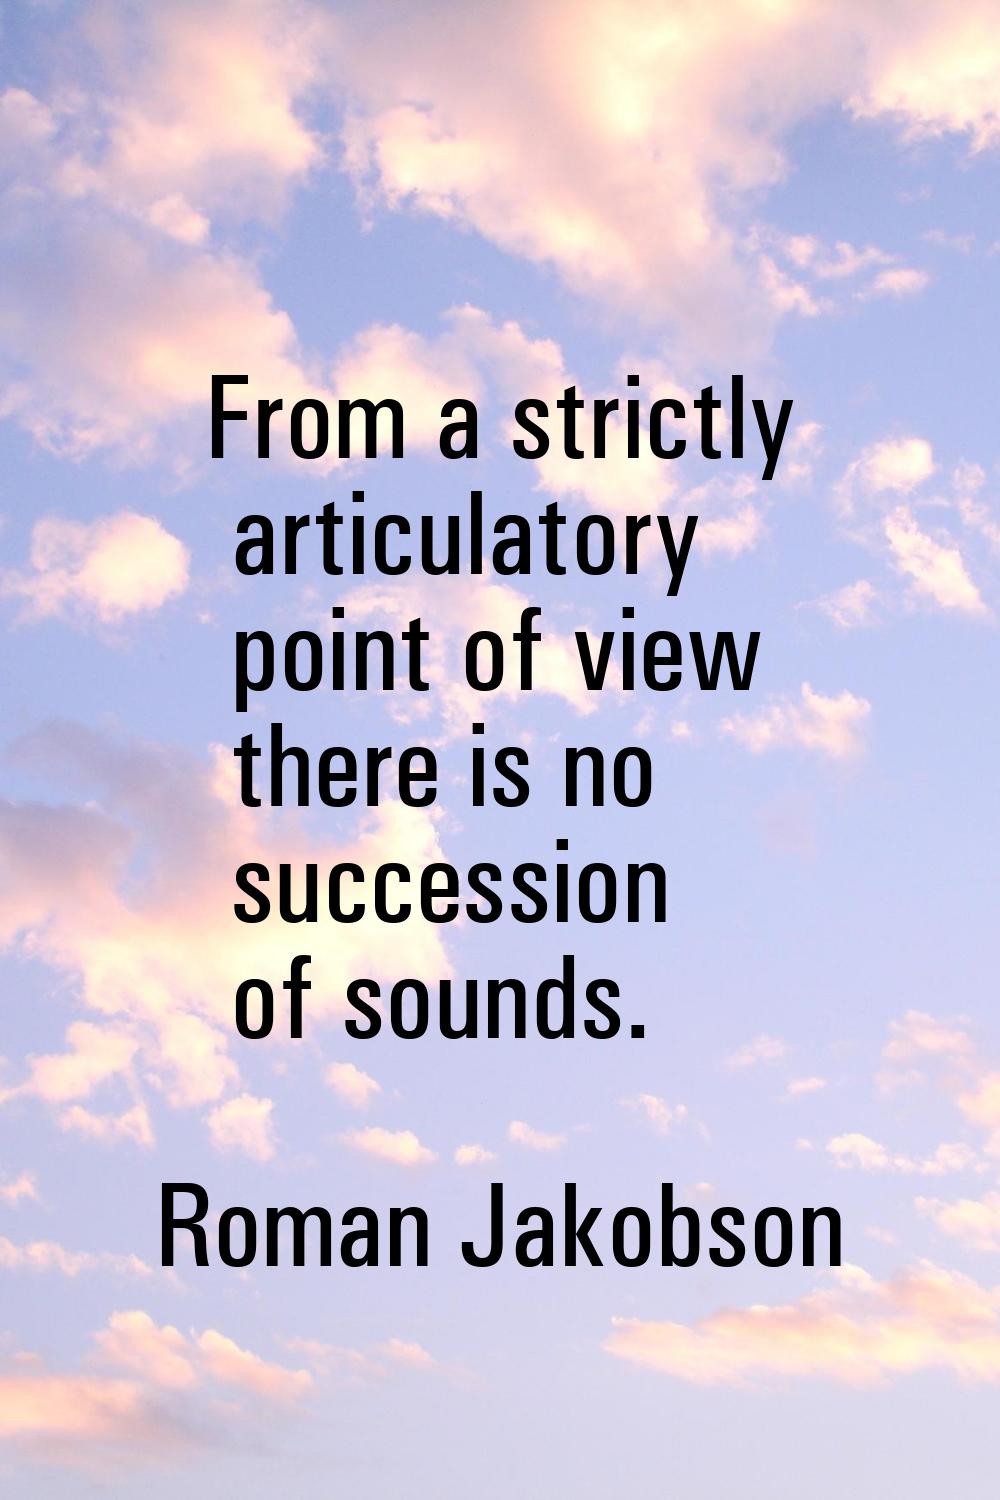 From a strictly articulatory point of view there is no succession of sounds.